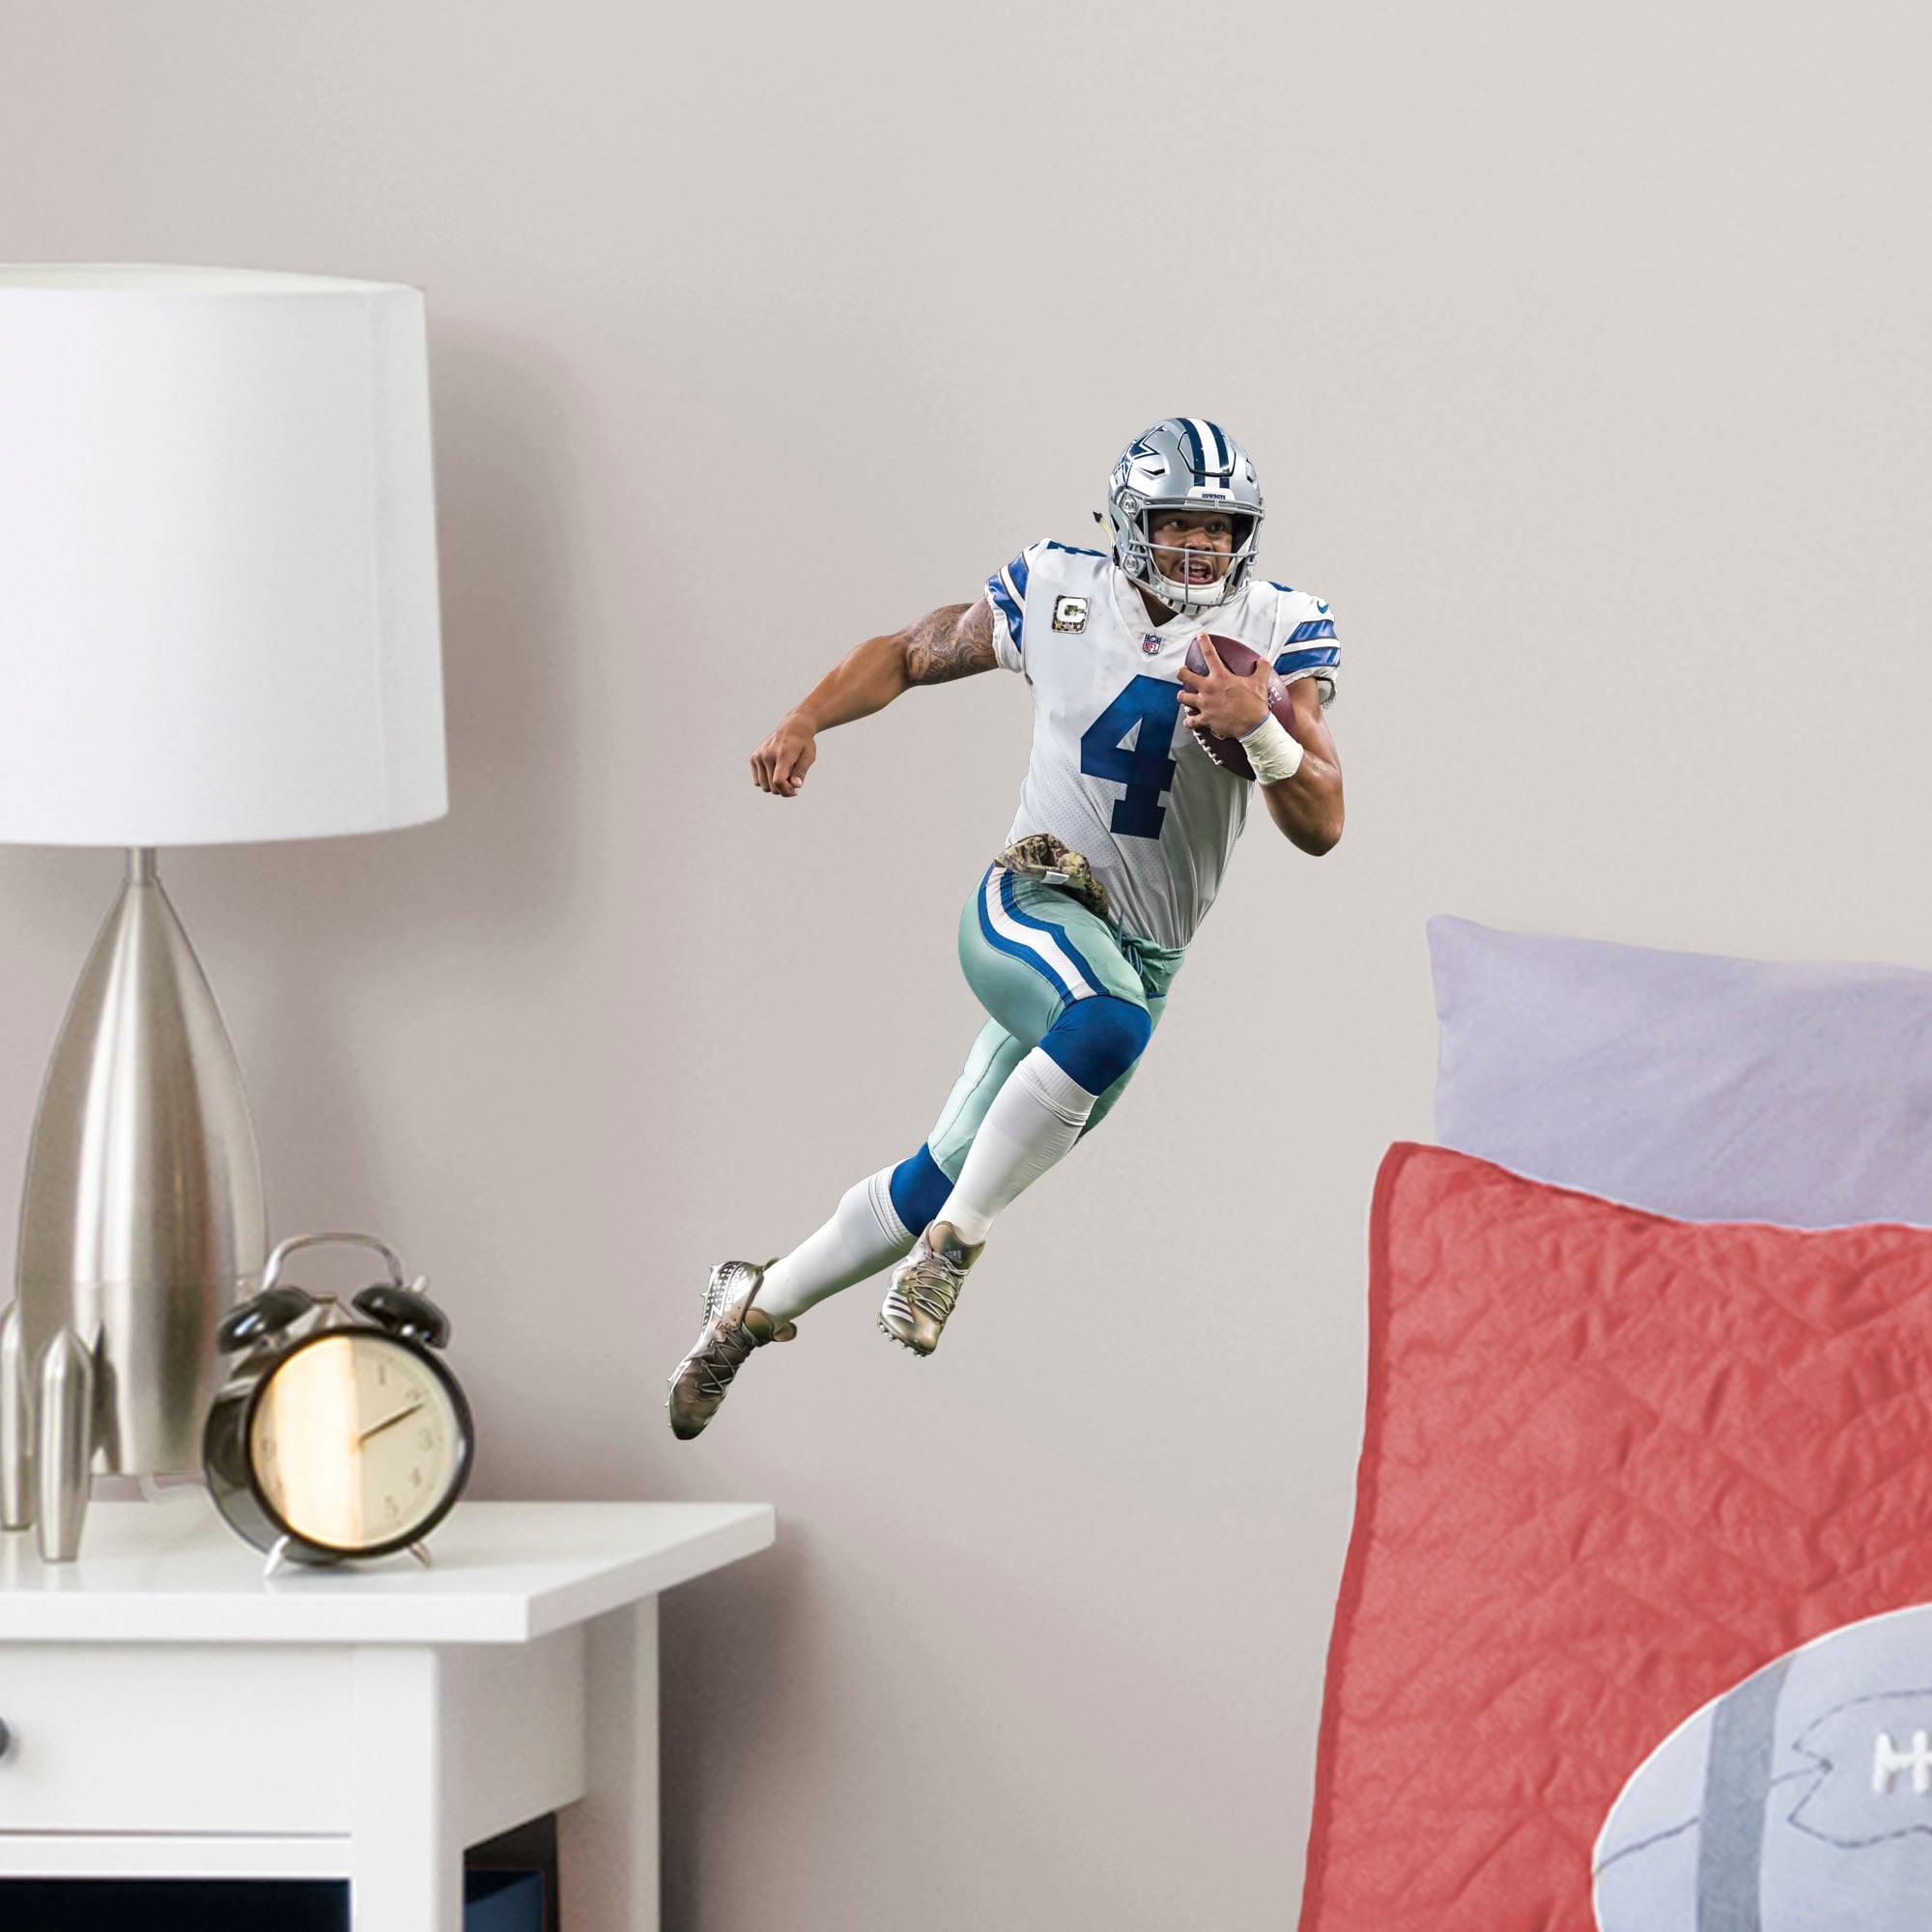 Dak Prescott for Dallas Cowboys: Scramble - Officially Licensed NFL Removable Wall Decal Large by Fathead | Vinyl